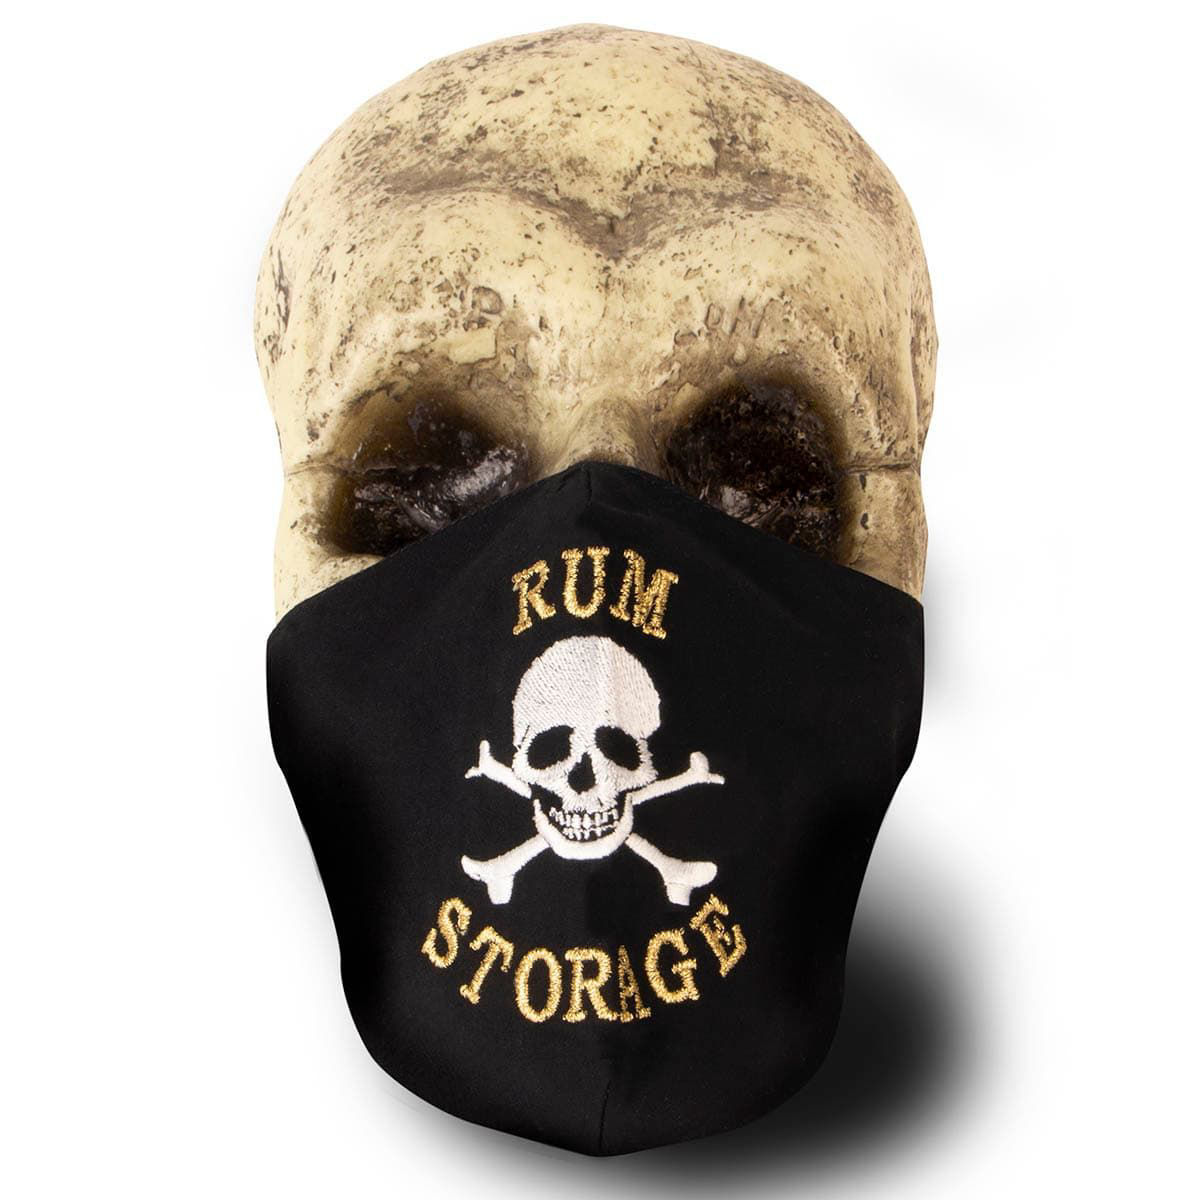 Black Cotton Face Mask with silk embroidery stating Rum Storage, adjustable straps and pocket for disposable filter